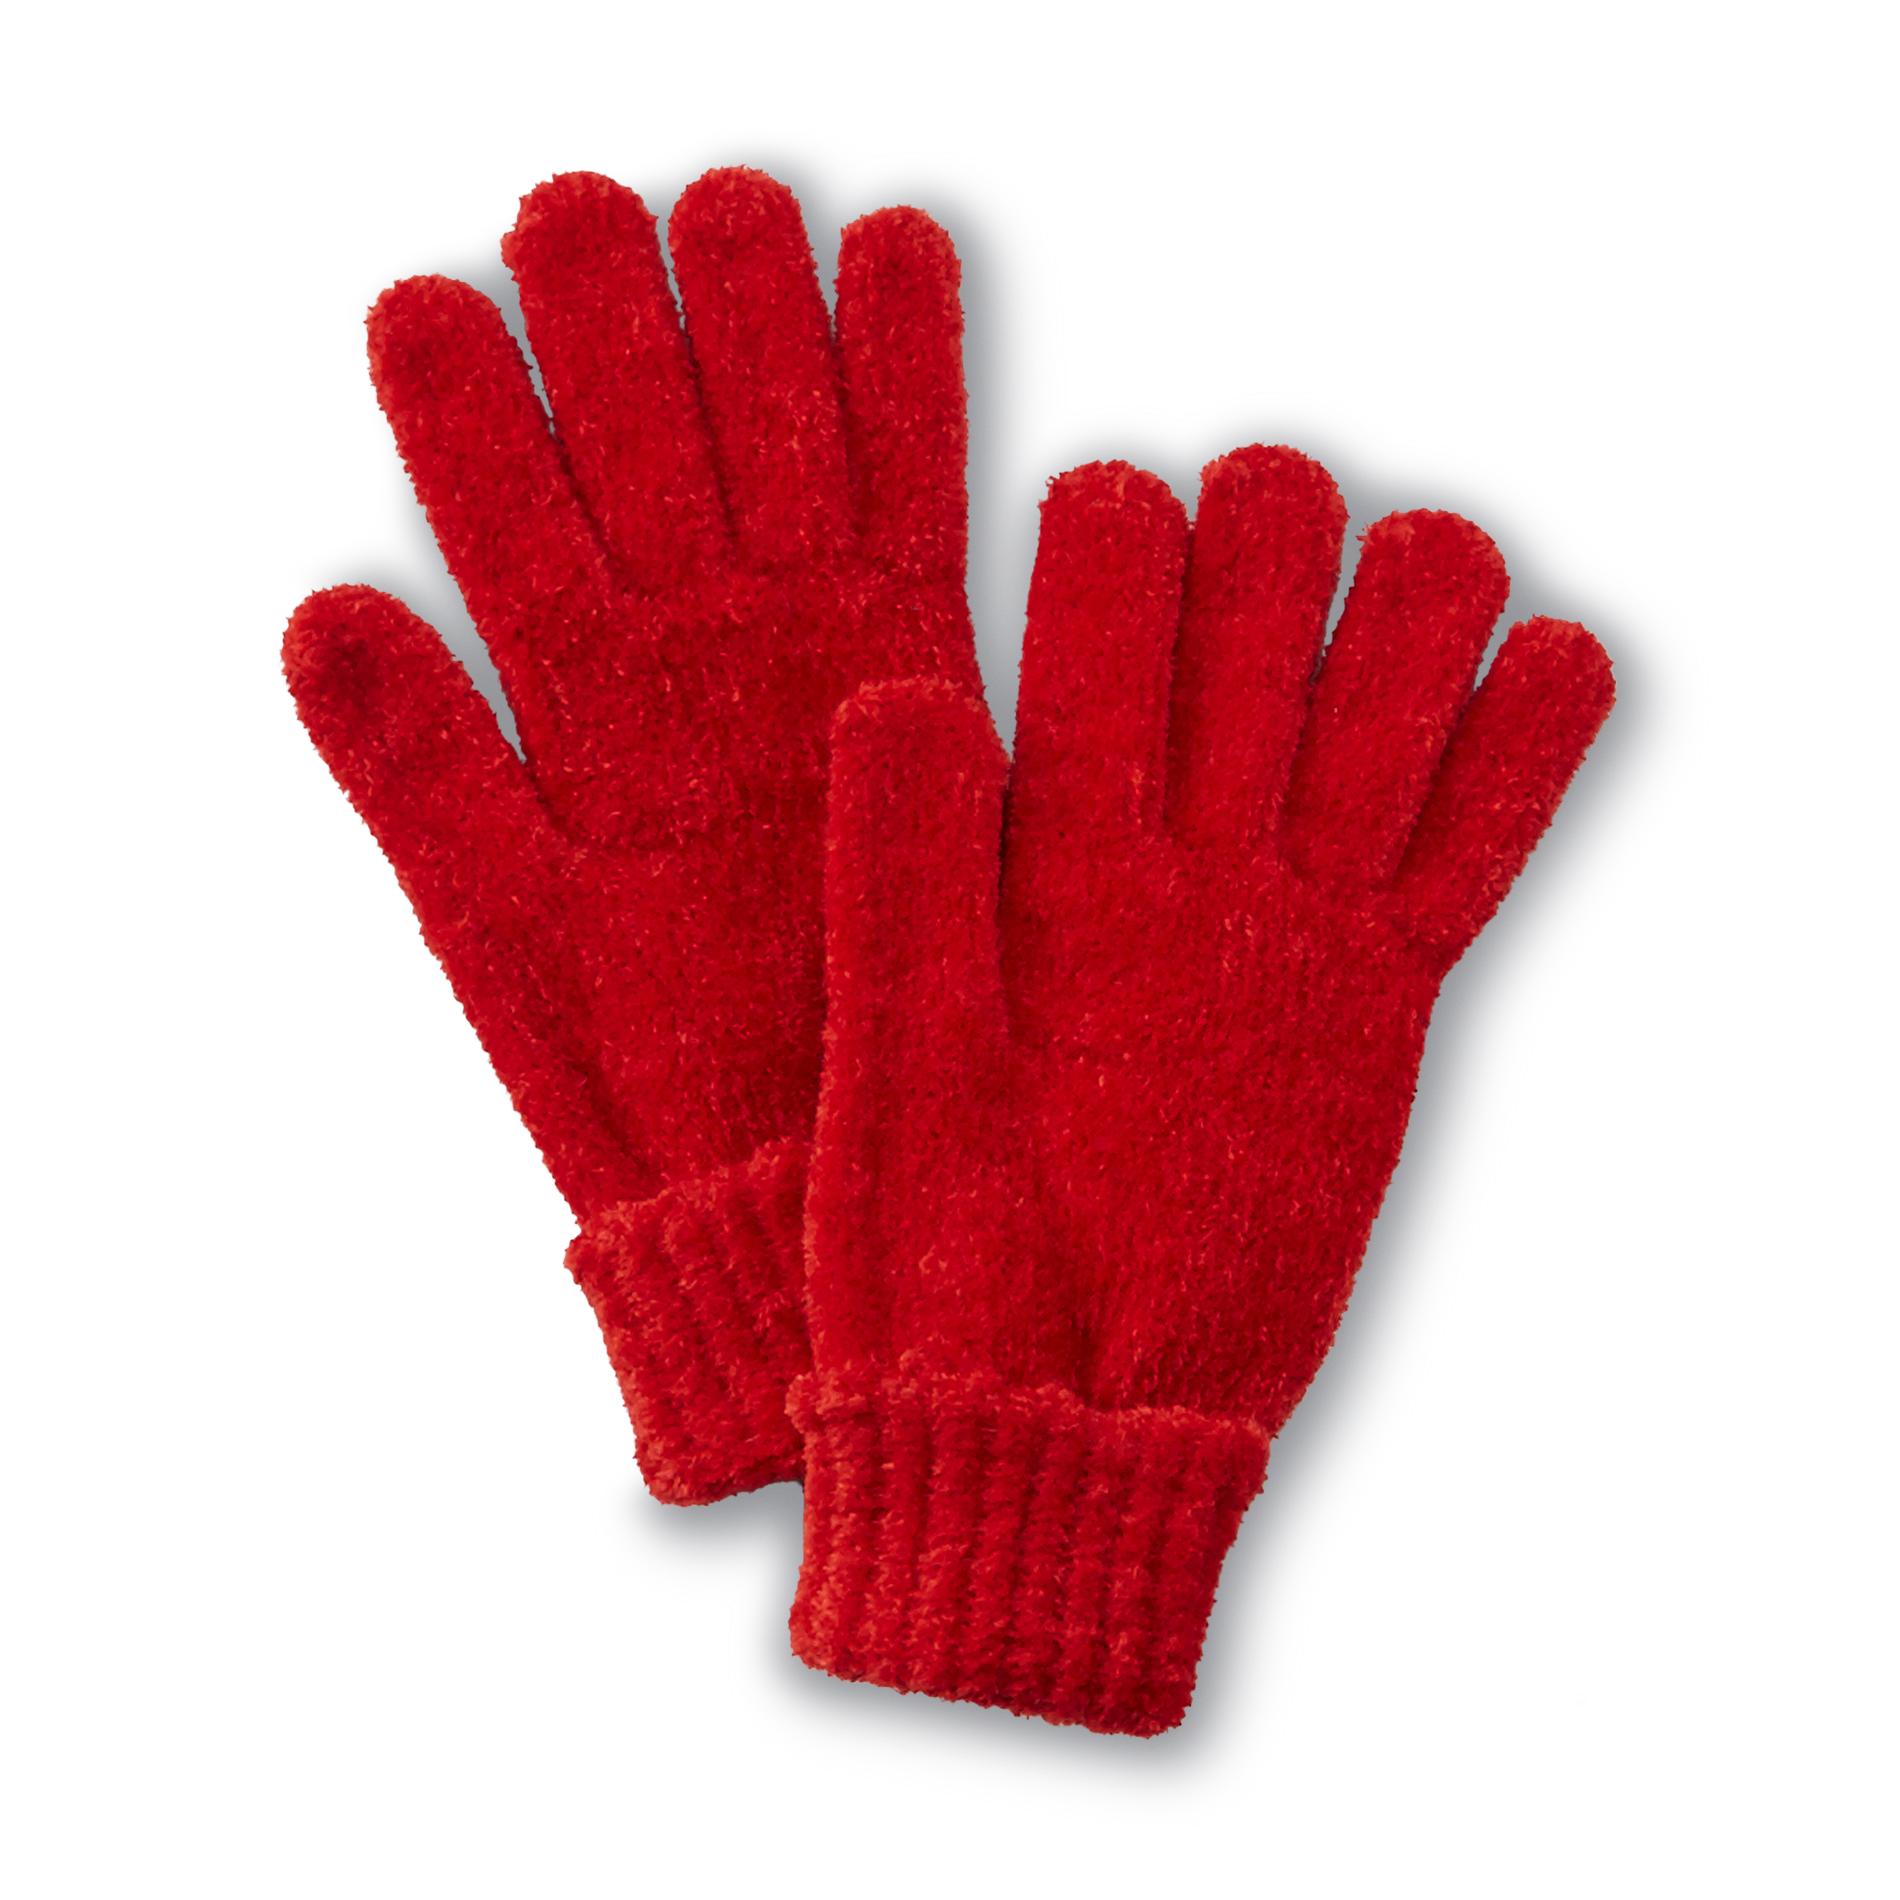 Jaclyn Smith Women's Chenille Gloves - Marled